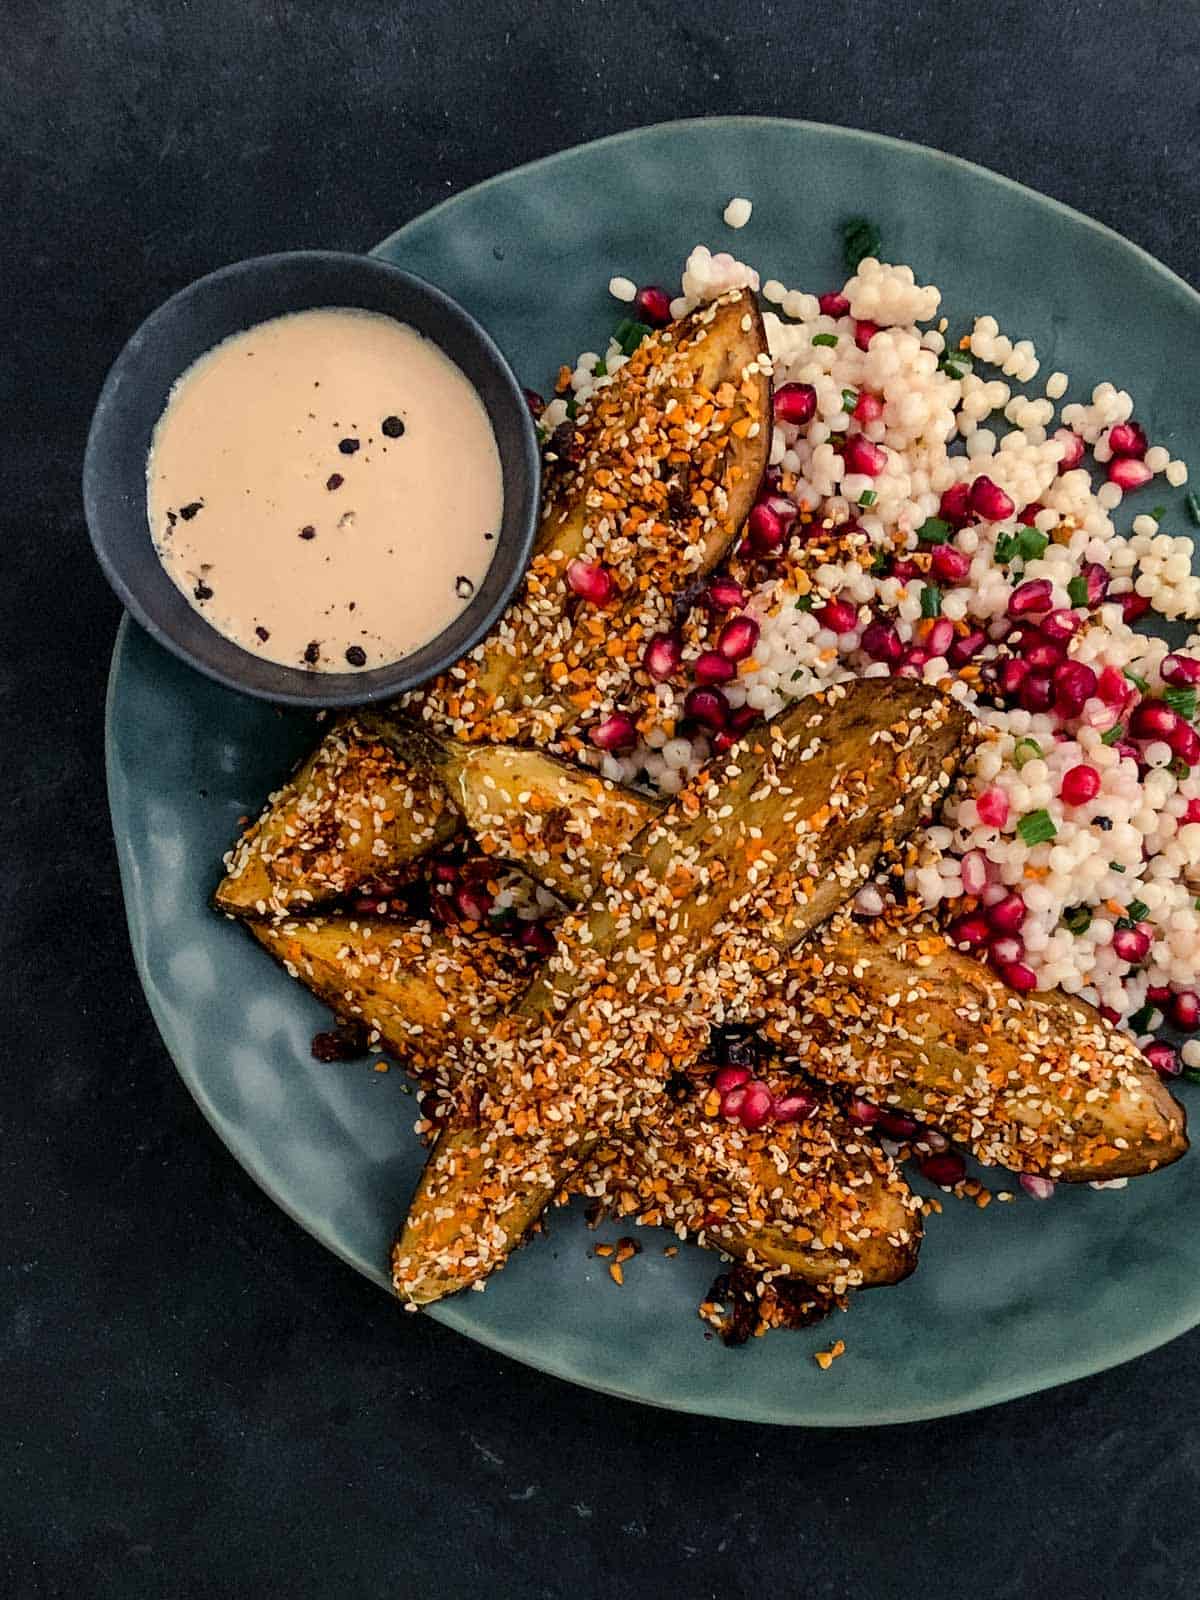 Dukkah Eggplant Baked Slices Salad with Pomegranate Molasses Yoghurt Dressing served on the side in a bowl